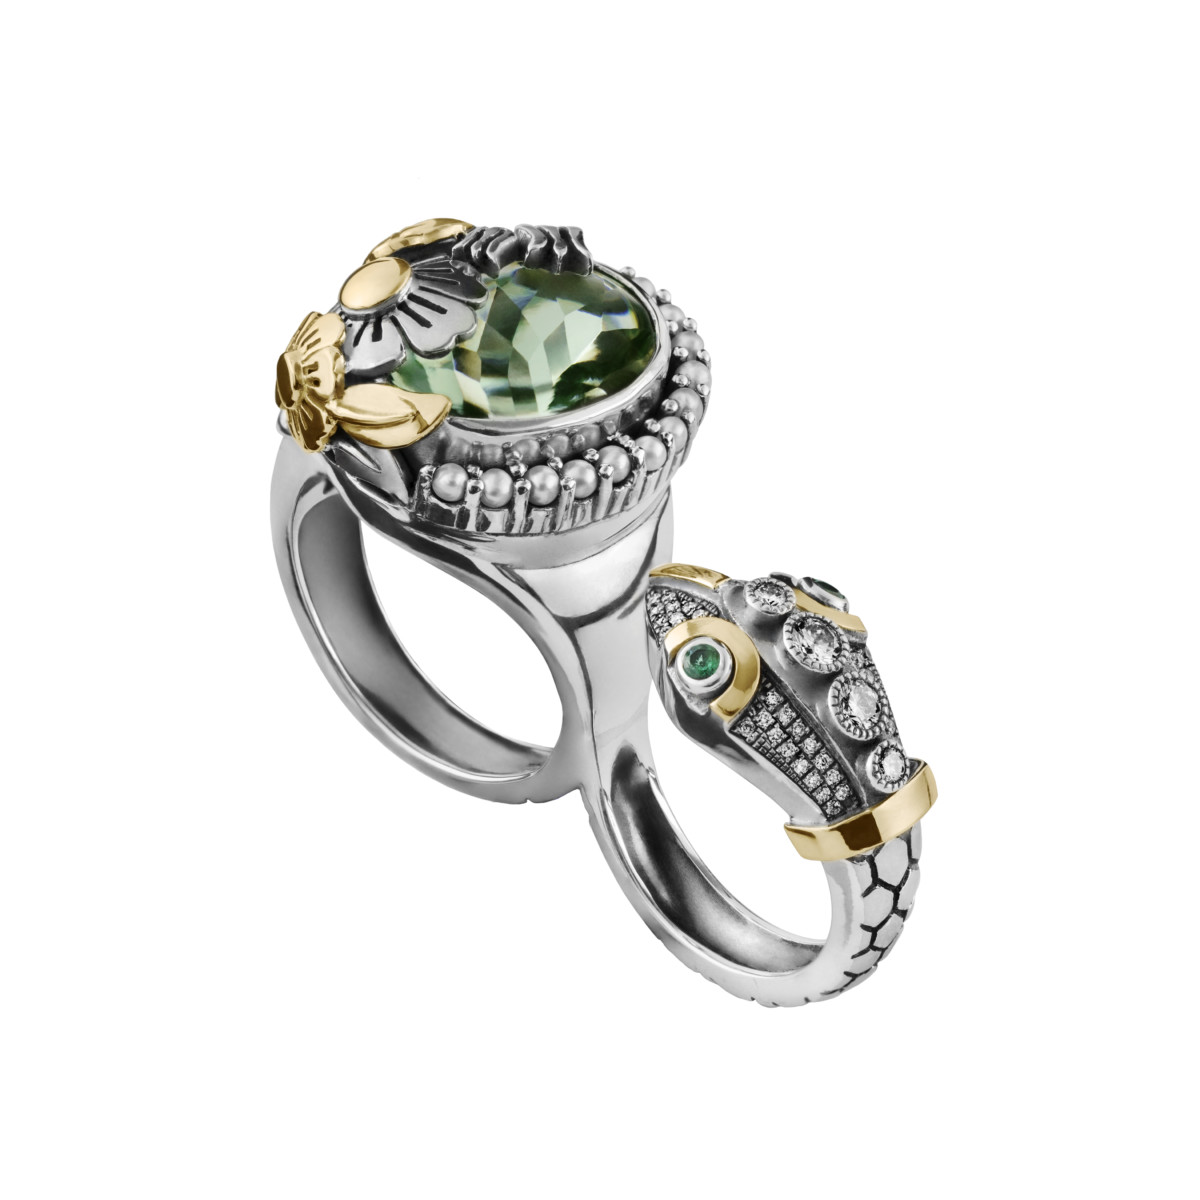 Azza Fahmy Jewellery expands Wonders of Nature collection